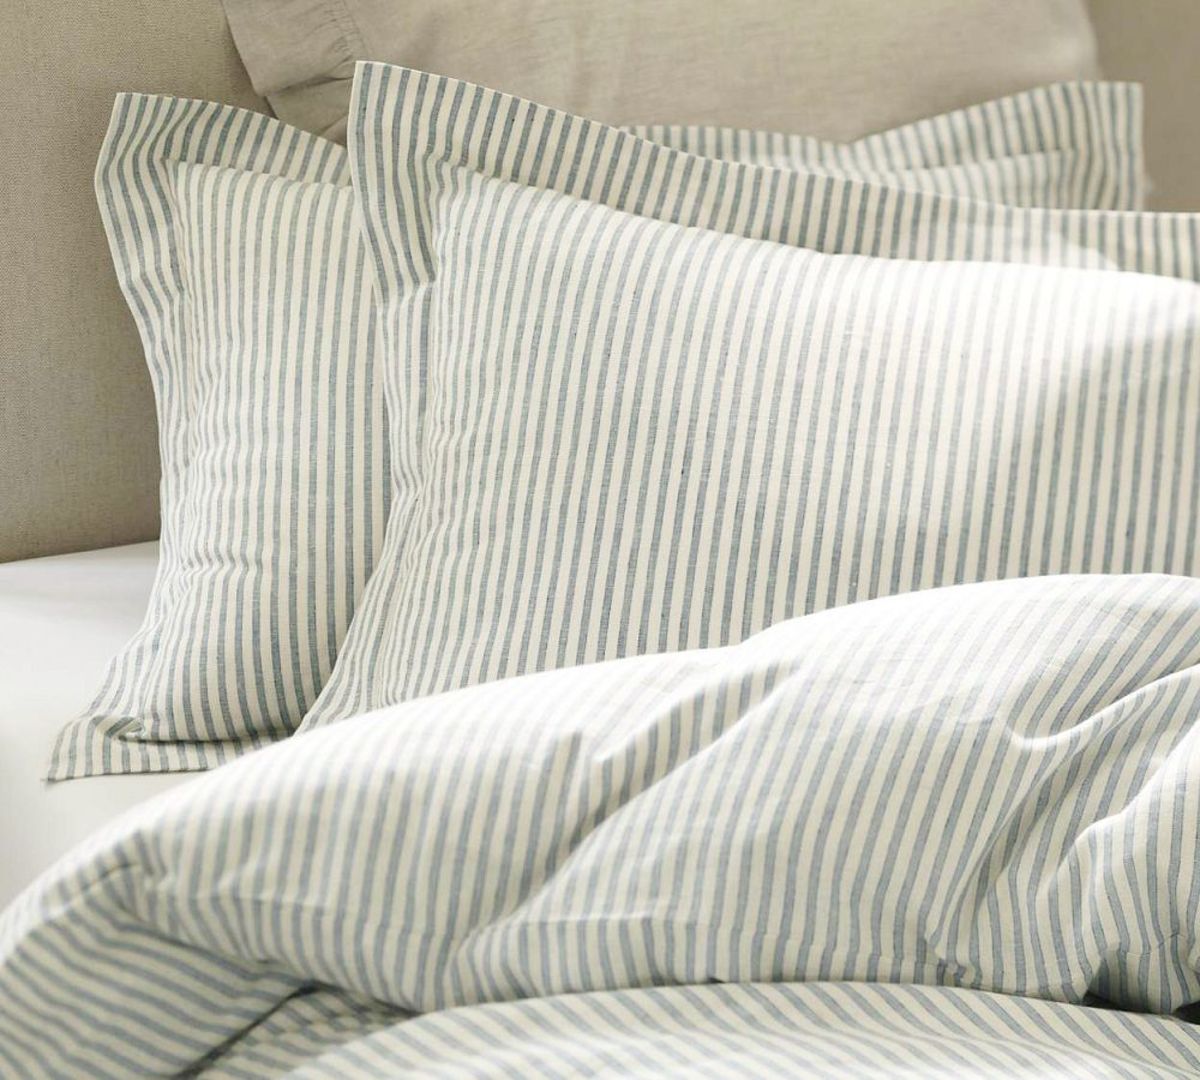 How To Make An Inexpensive Duvet Comforter Cover Using Flat Sheets